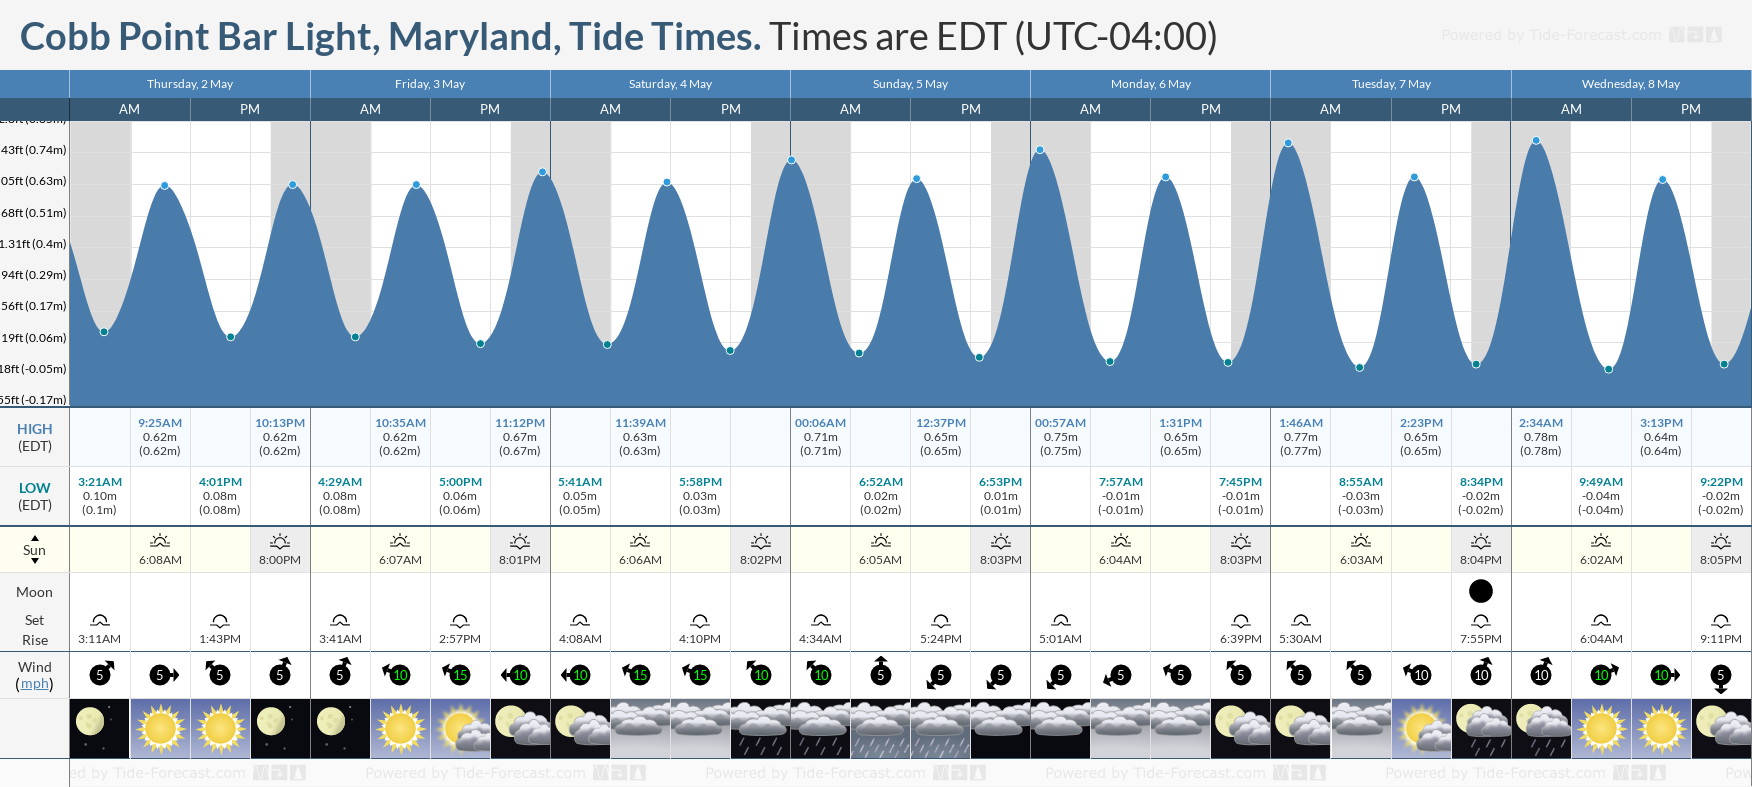 Cobb Point Bar Light, Maryland Tide Chart including high and low tide tide times for the next 7 days